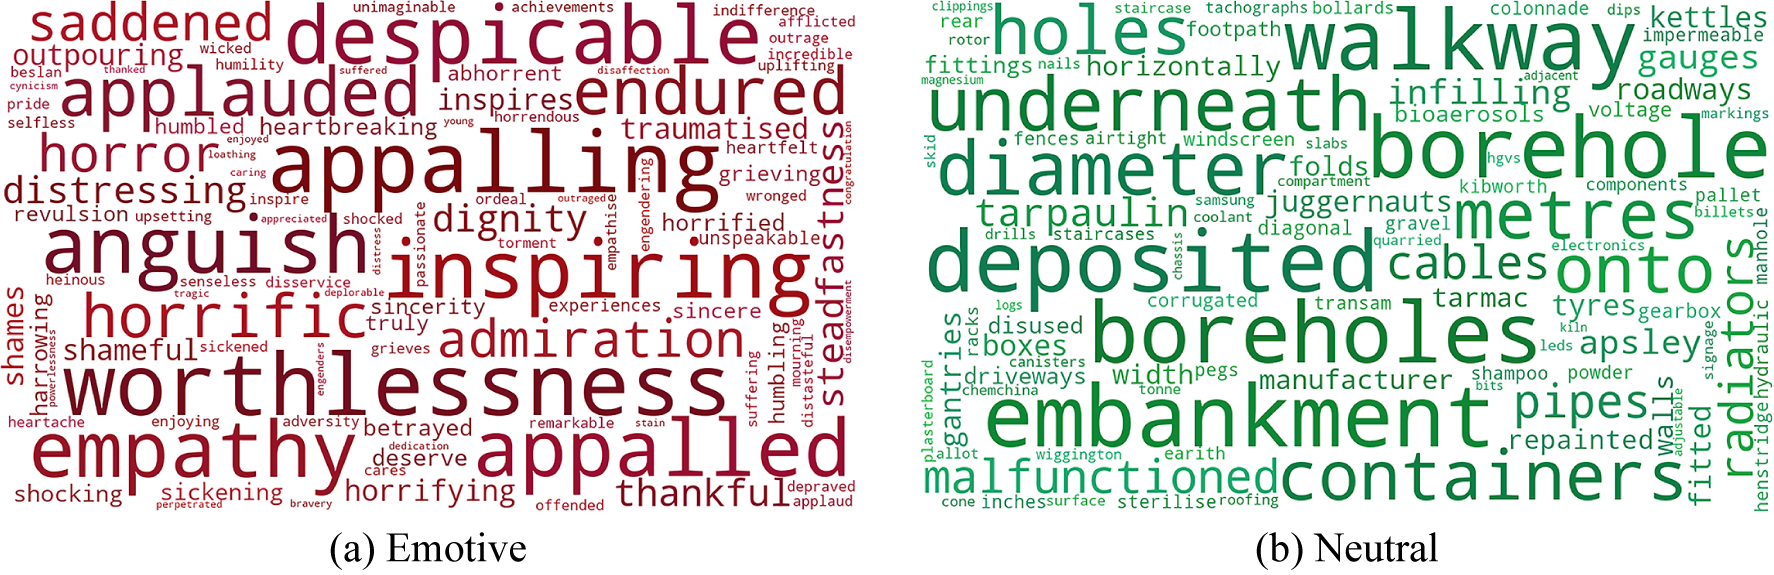 Word Clouds of Emotive and Neutral Words